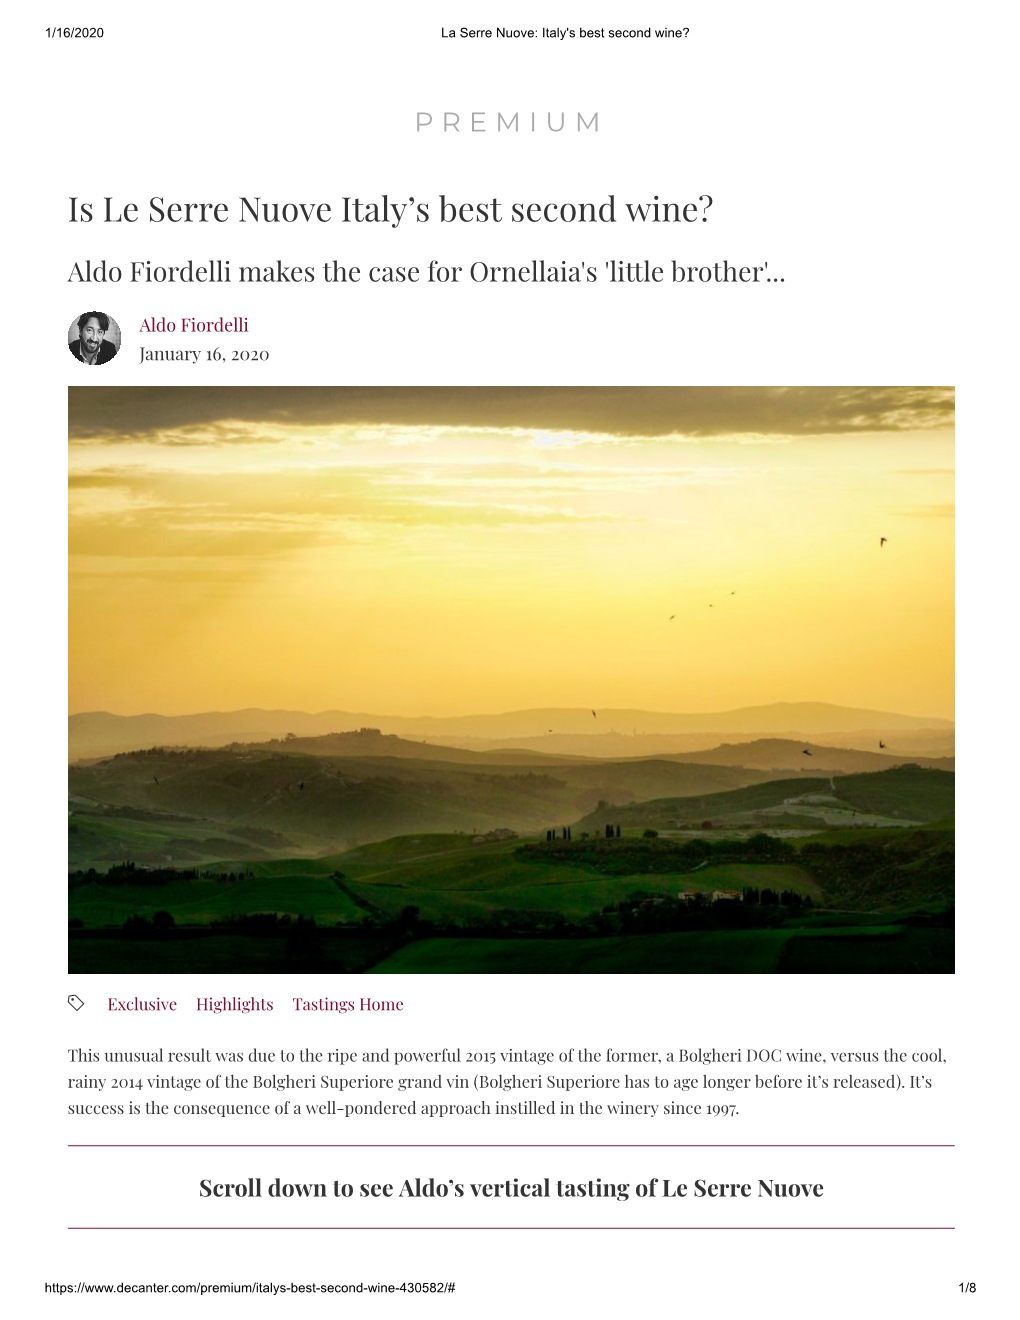 Is Le Serre Nuove Italy's Best Second Wine?